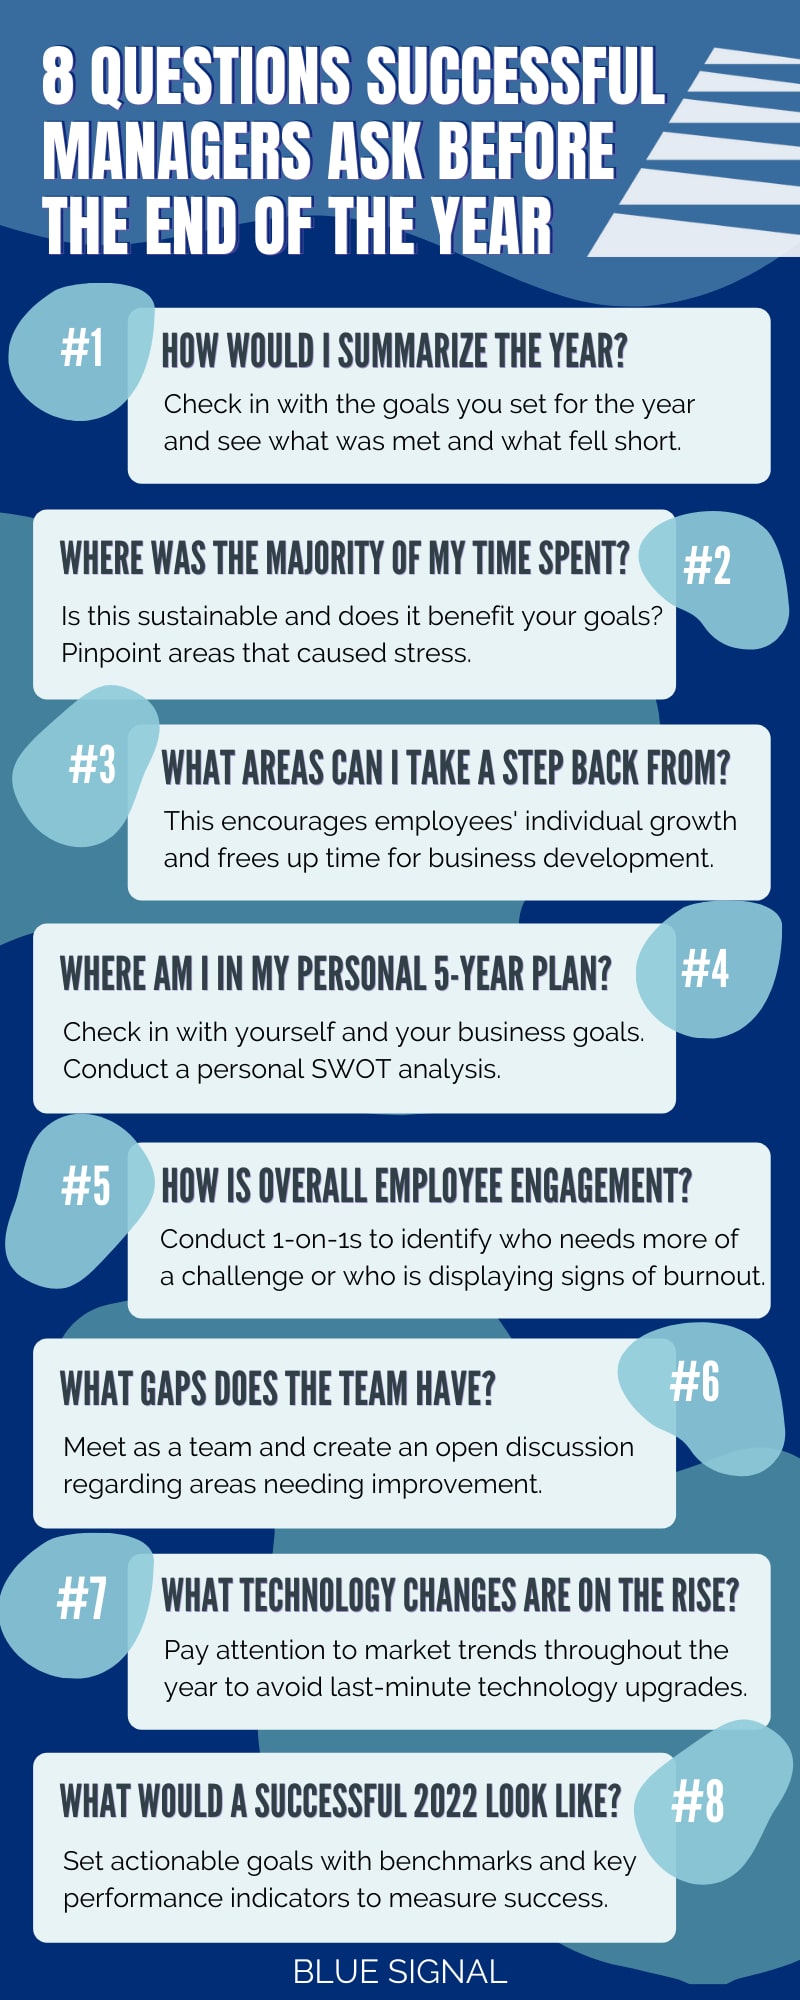 8 Questions Successful Managers Ask Before the End of the Year